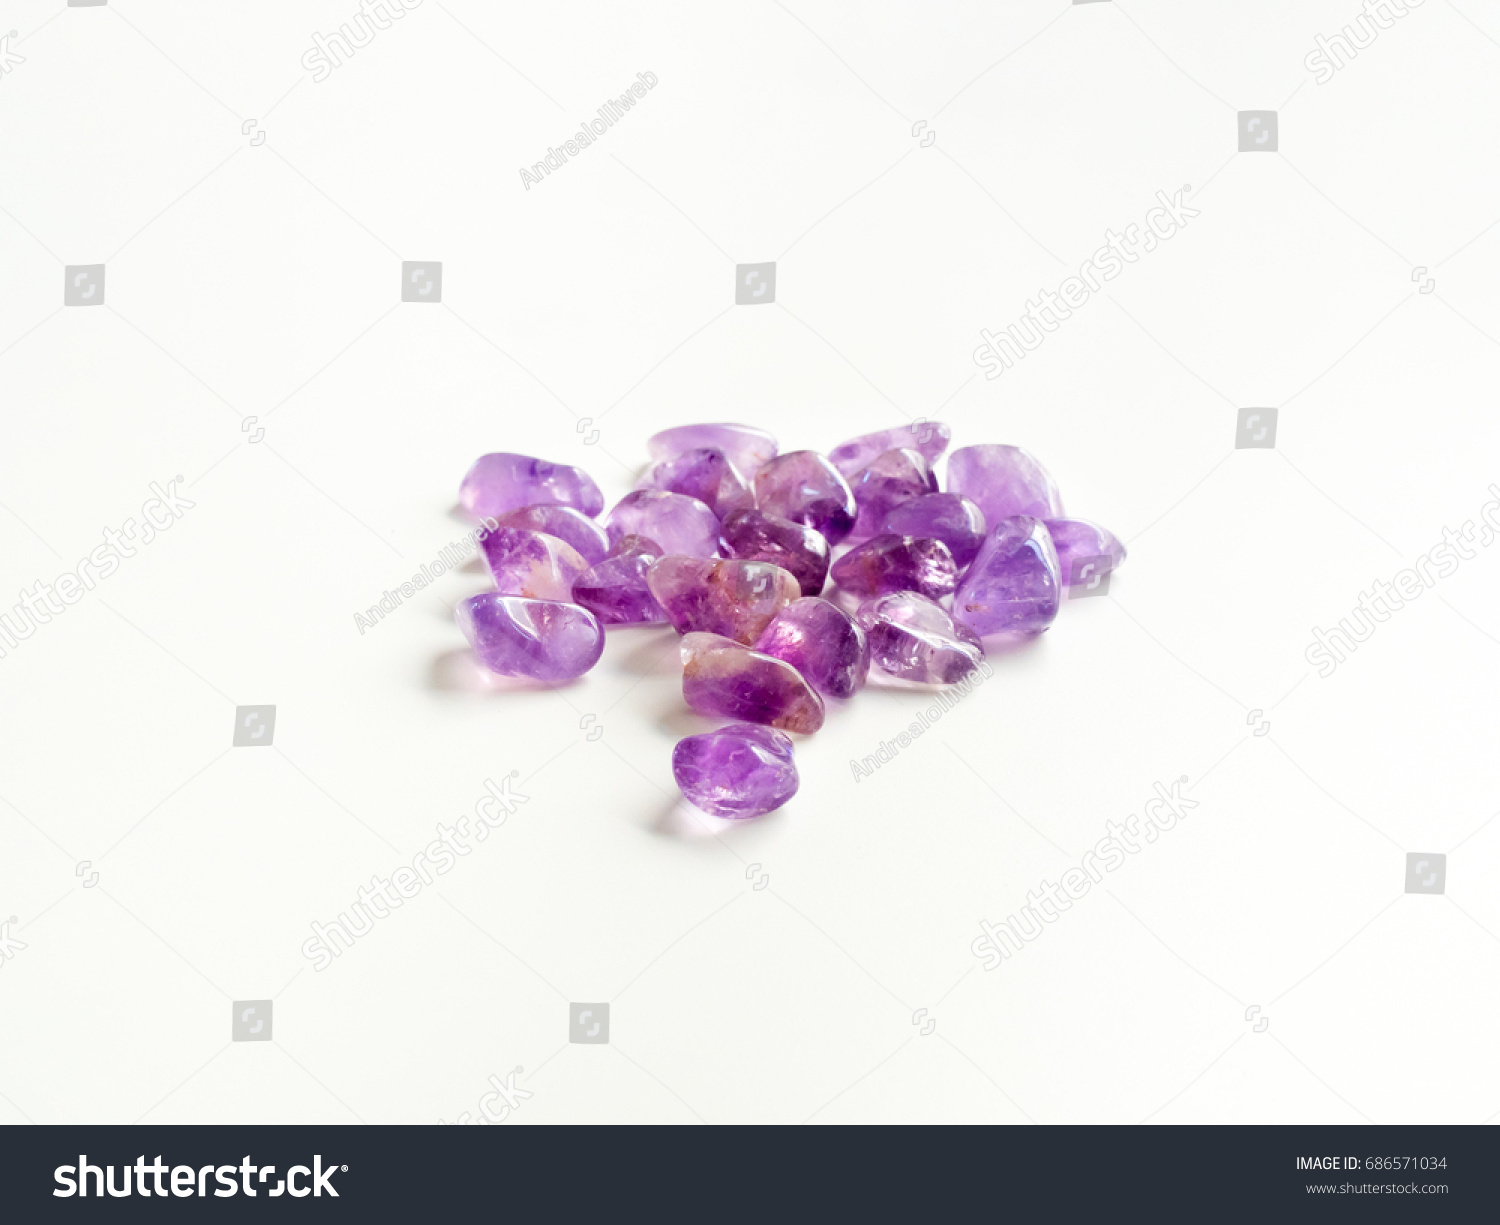 Tumbled Amethyst stones close up on table for crystal therapy treatments and reiki #686571034